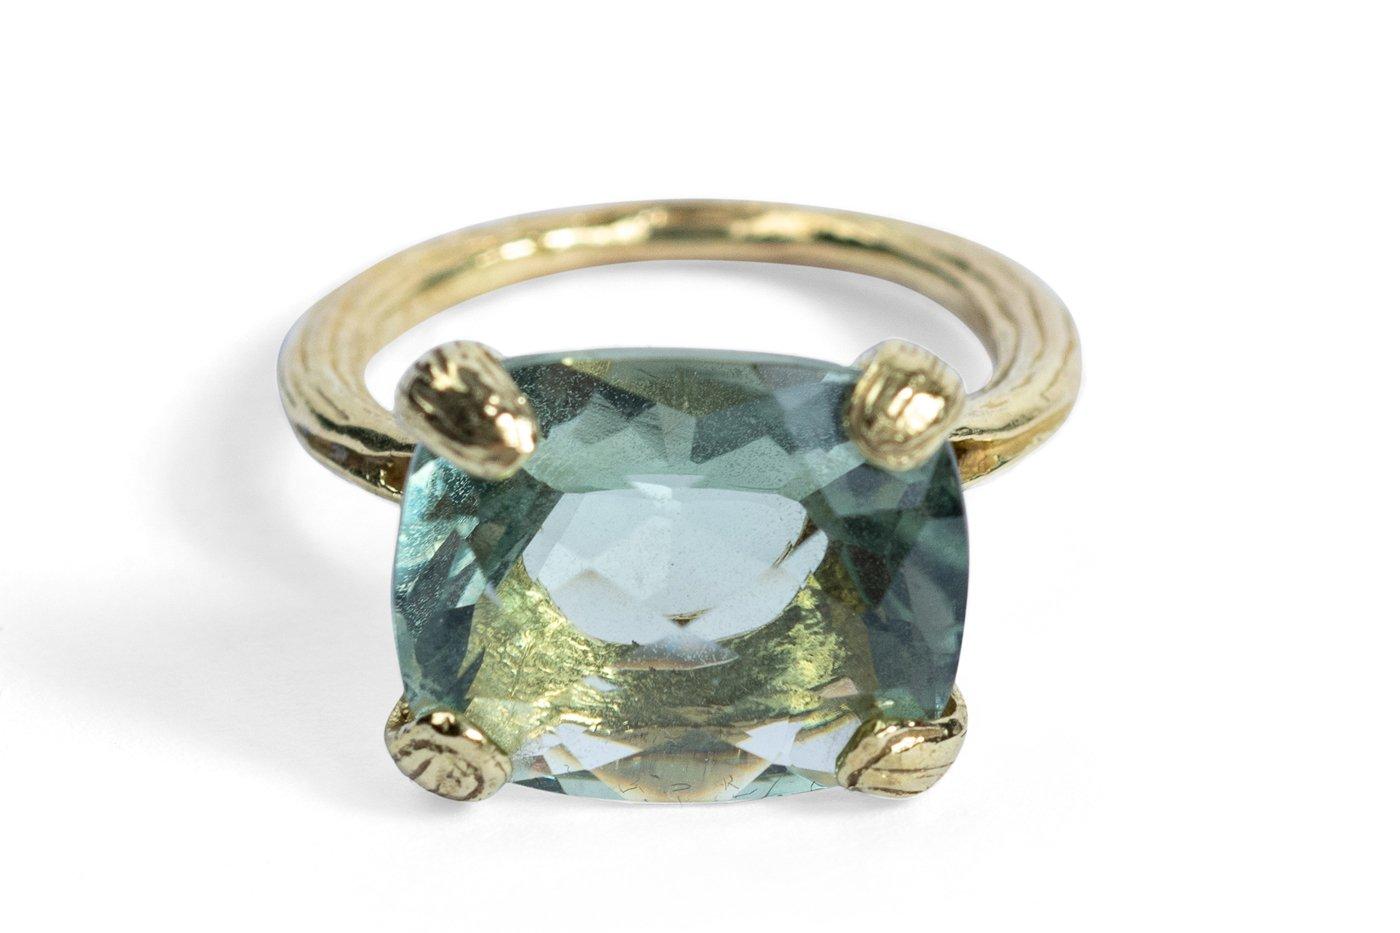 A faceted green-amethyst (also known as prasiolite) shines its soothing light, anchored in Gabrielle's 18k textured petal prong ring shank. 

Size 6
14x12x8mm faceted green amethyst rectangle and 18k textured petal prong ring shank